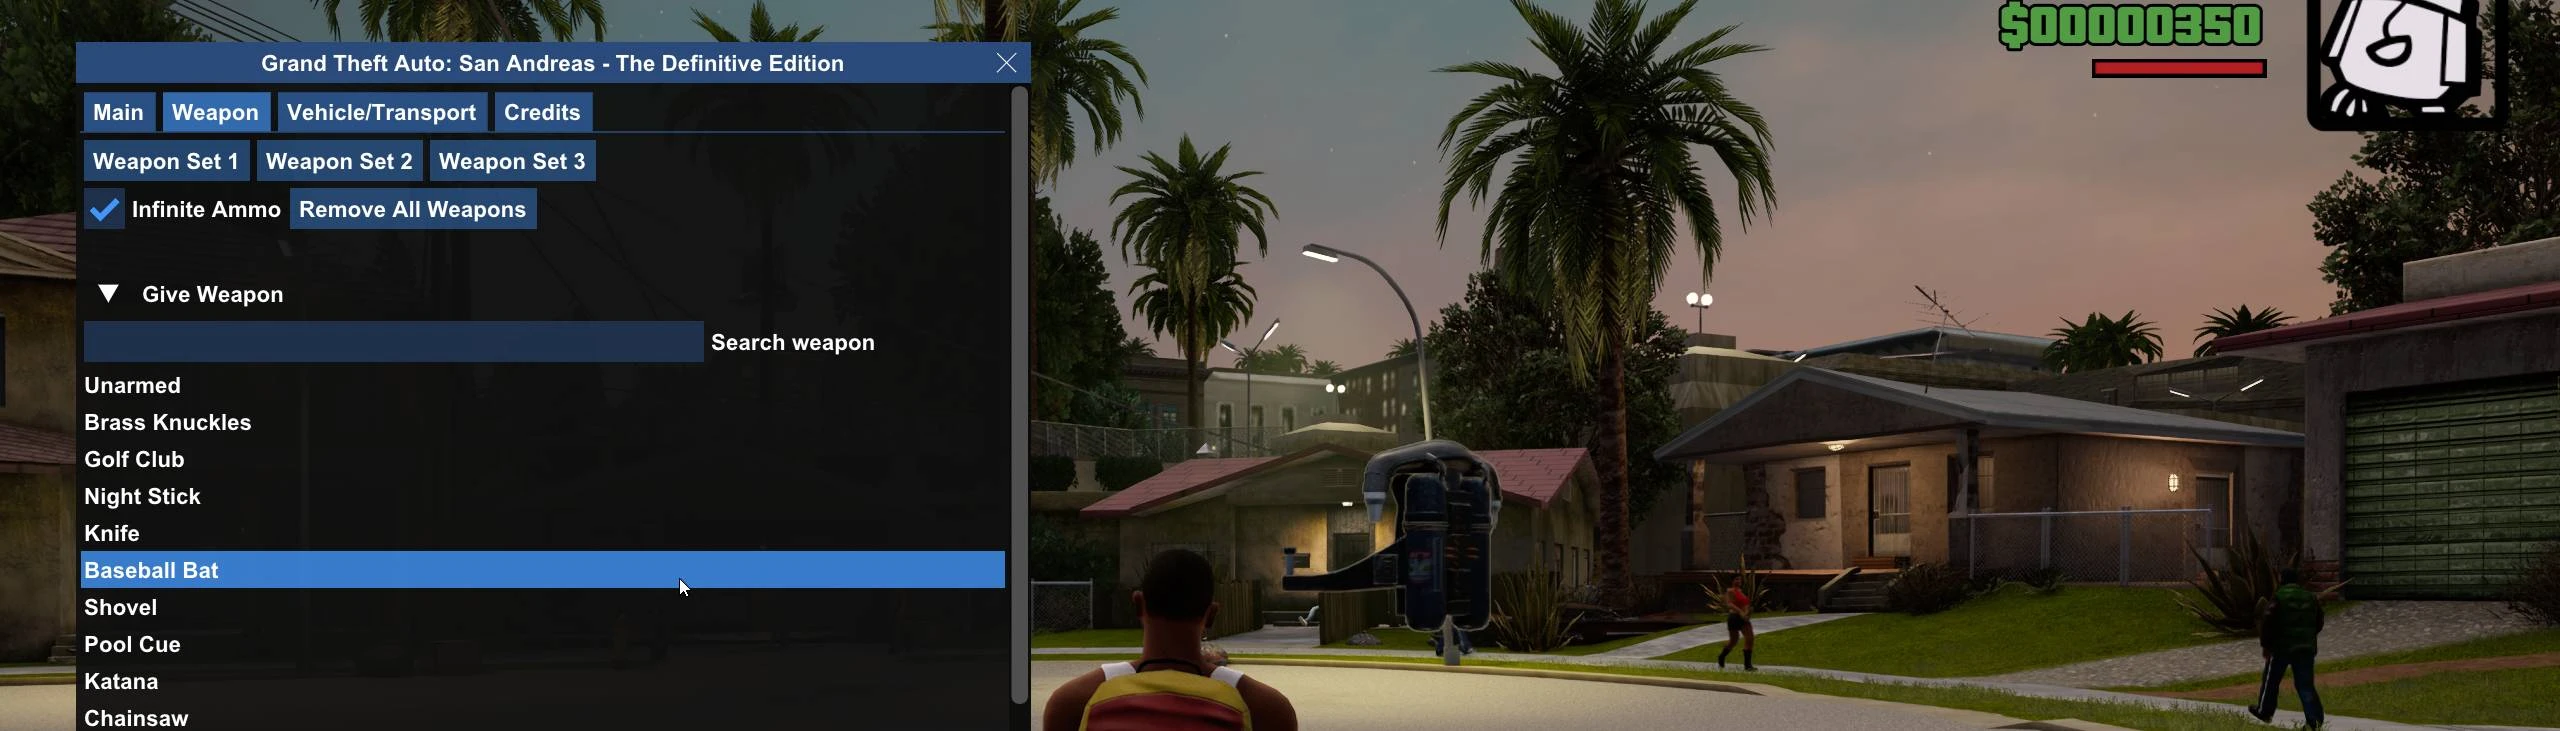 GTA San Andreas - The Definitive Edition Update 1.02 Fires Out